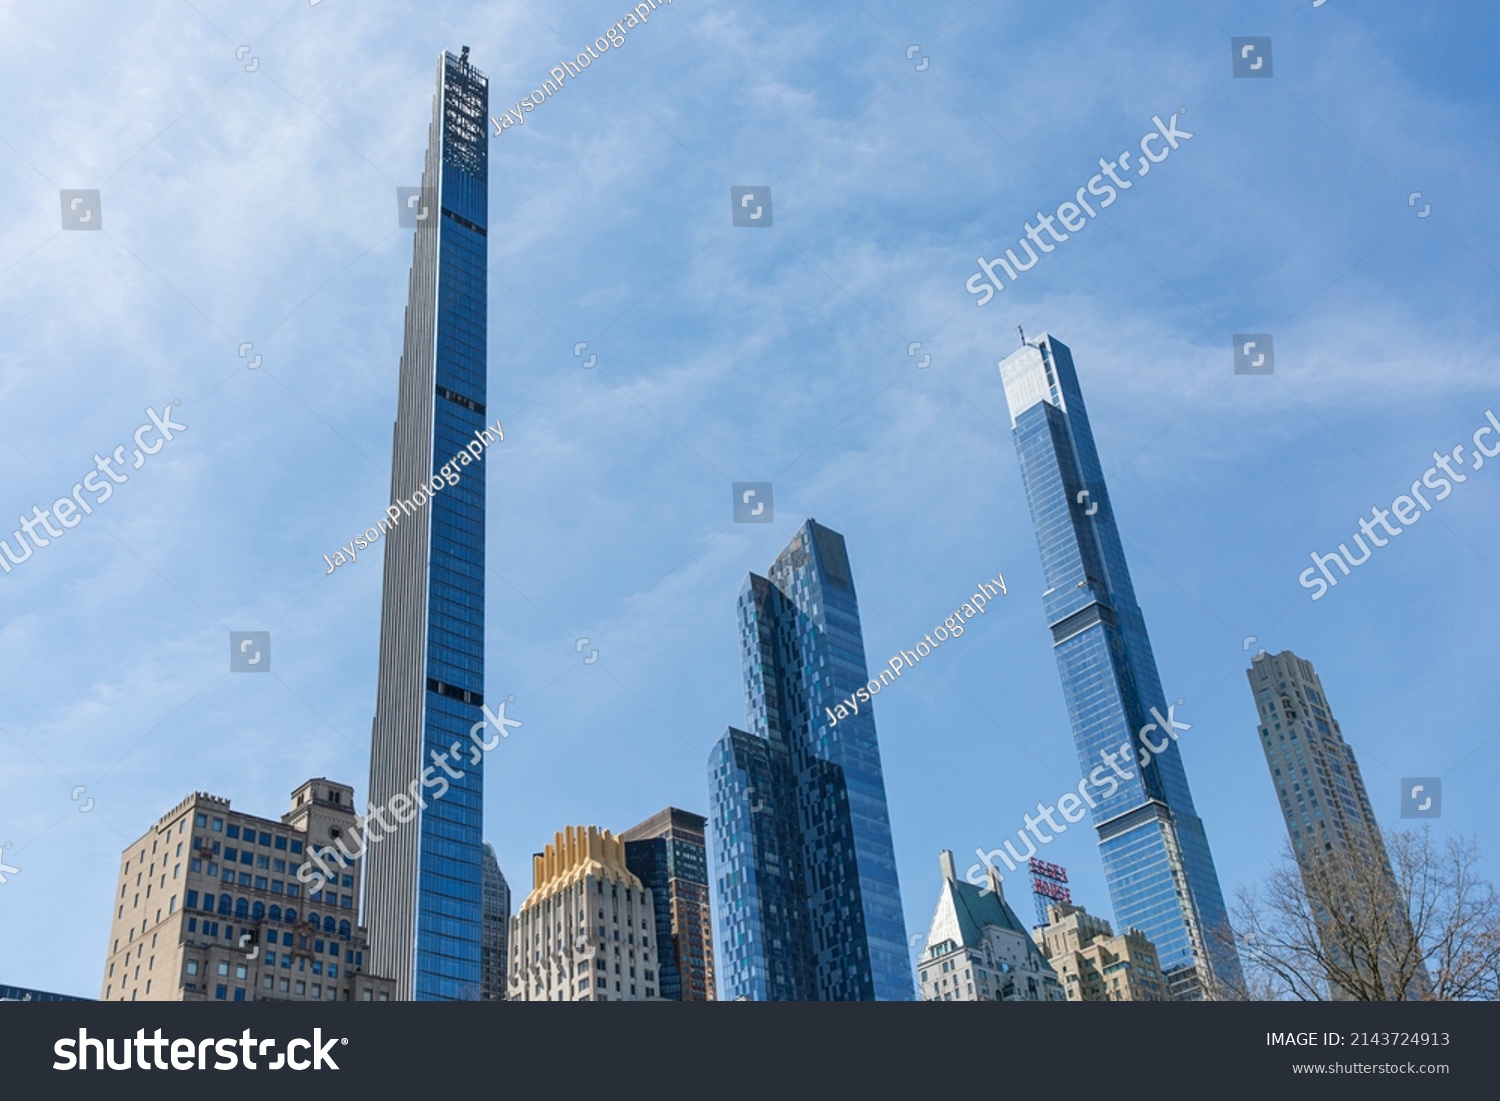 New York city, USA - April 2nd 2022: Steinway tower with Central park tower and other buildings at Manhattan.  Low angle view from central park. #2143724913